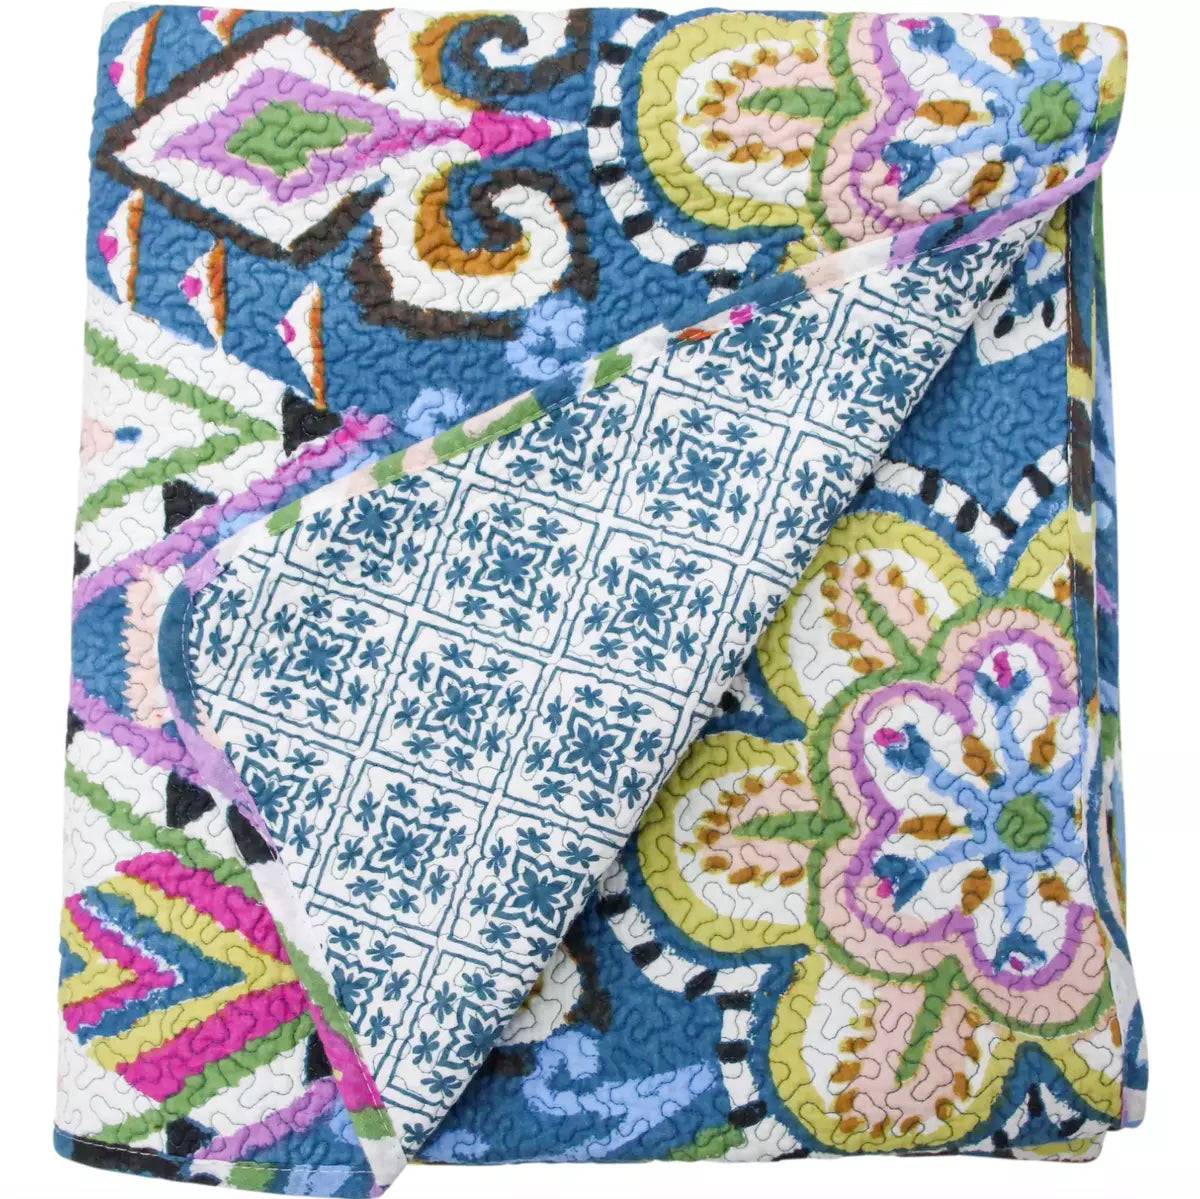 A LaVida Quilted Bedspread - Boho Escape with a colorful pattern on it.